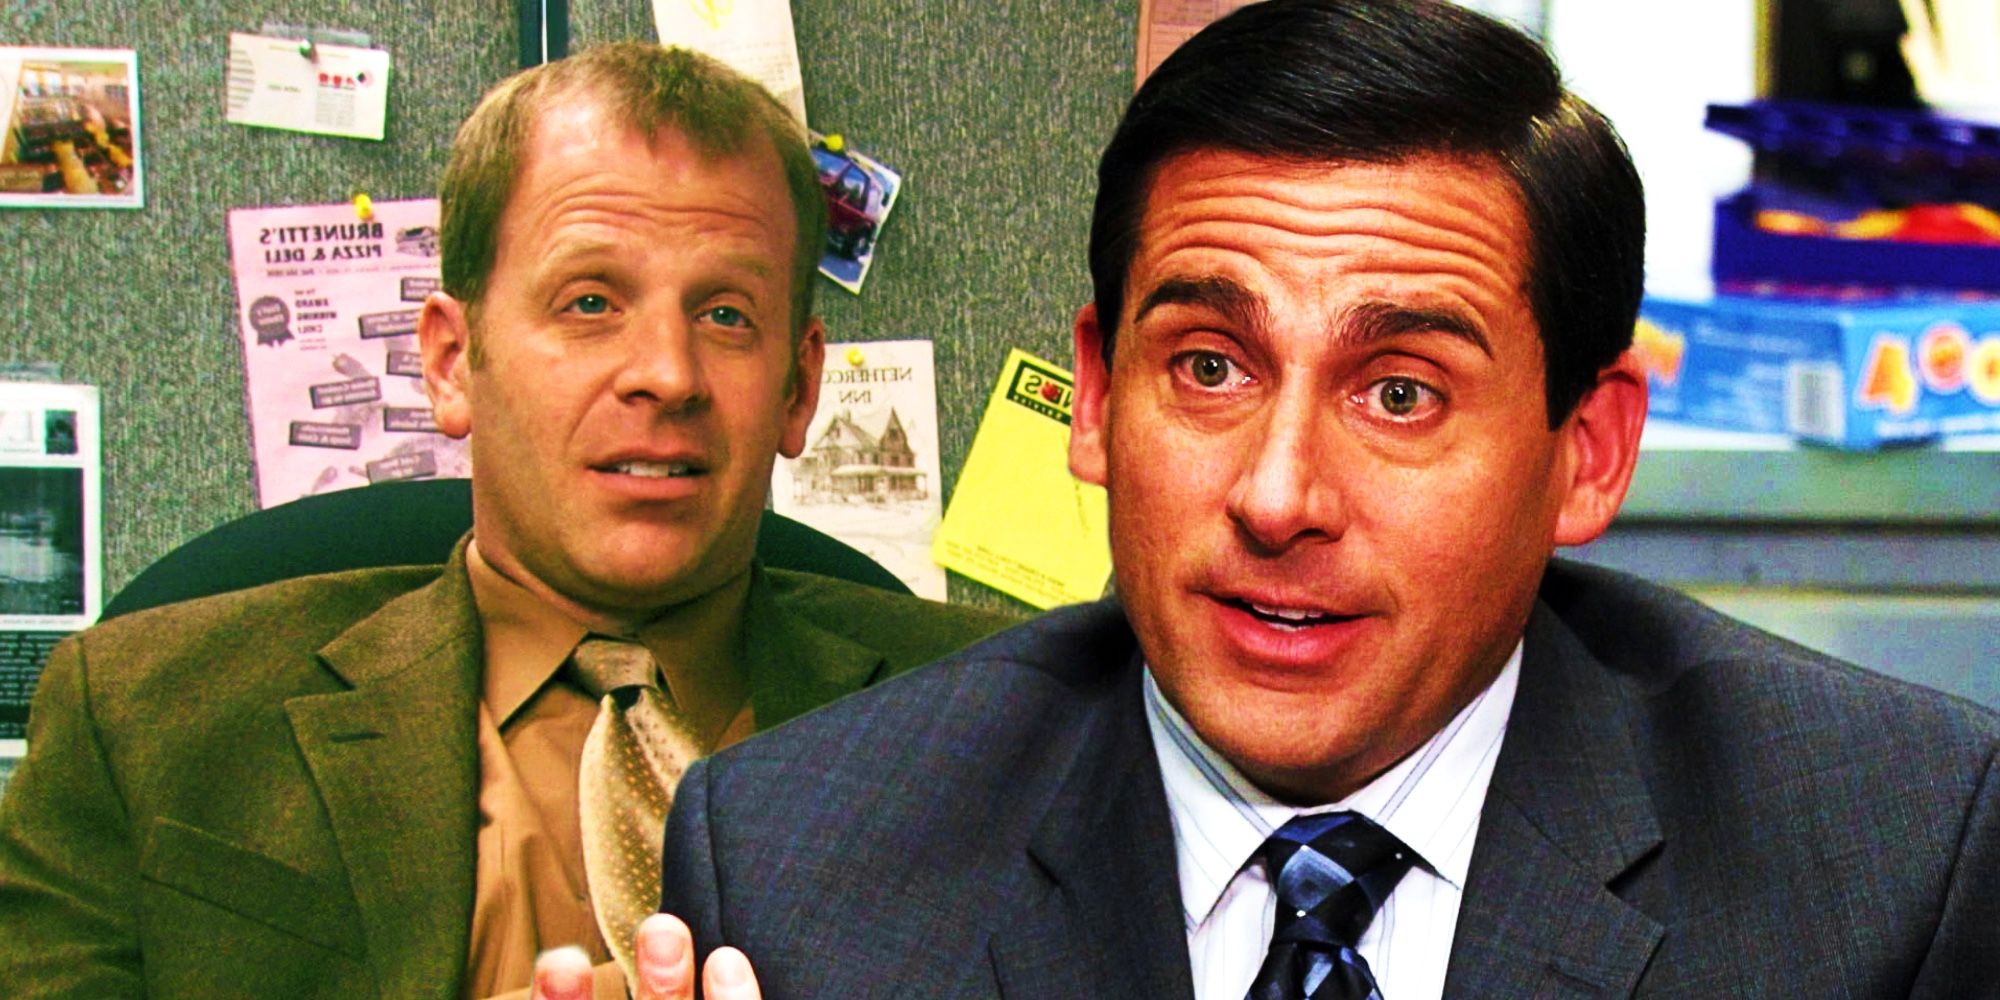 The Office': The Real Reason Michael Scott Hates Toby so Much